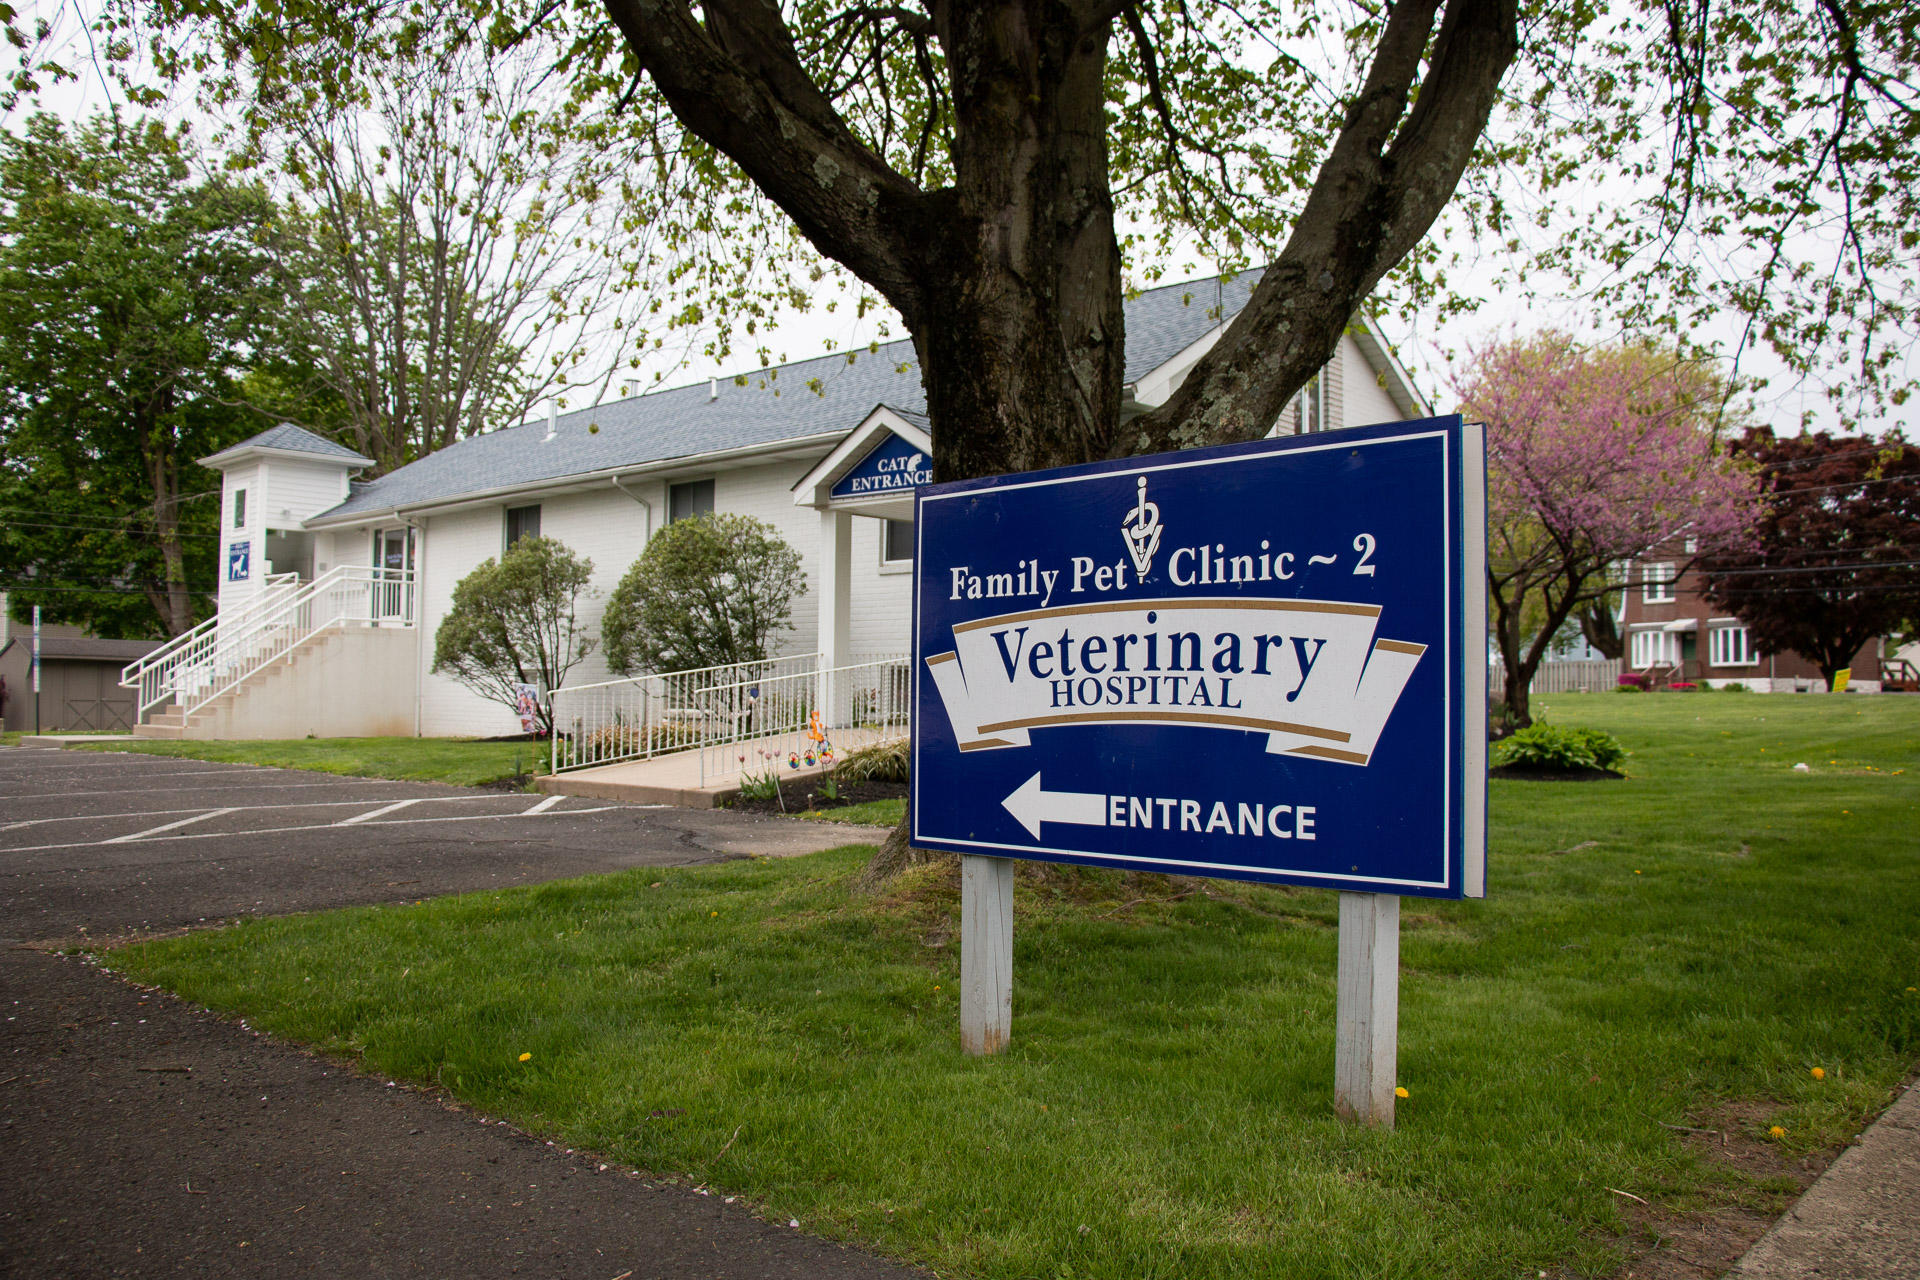 Our facility has a spacious parking lot to accommodate all of our clients and their pets.